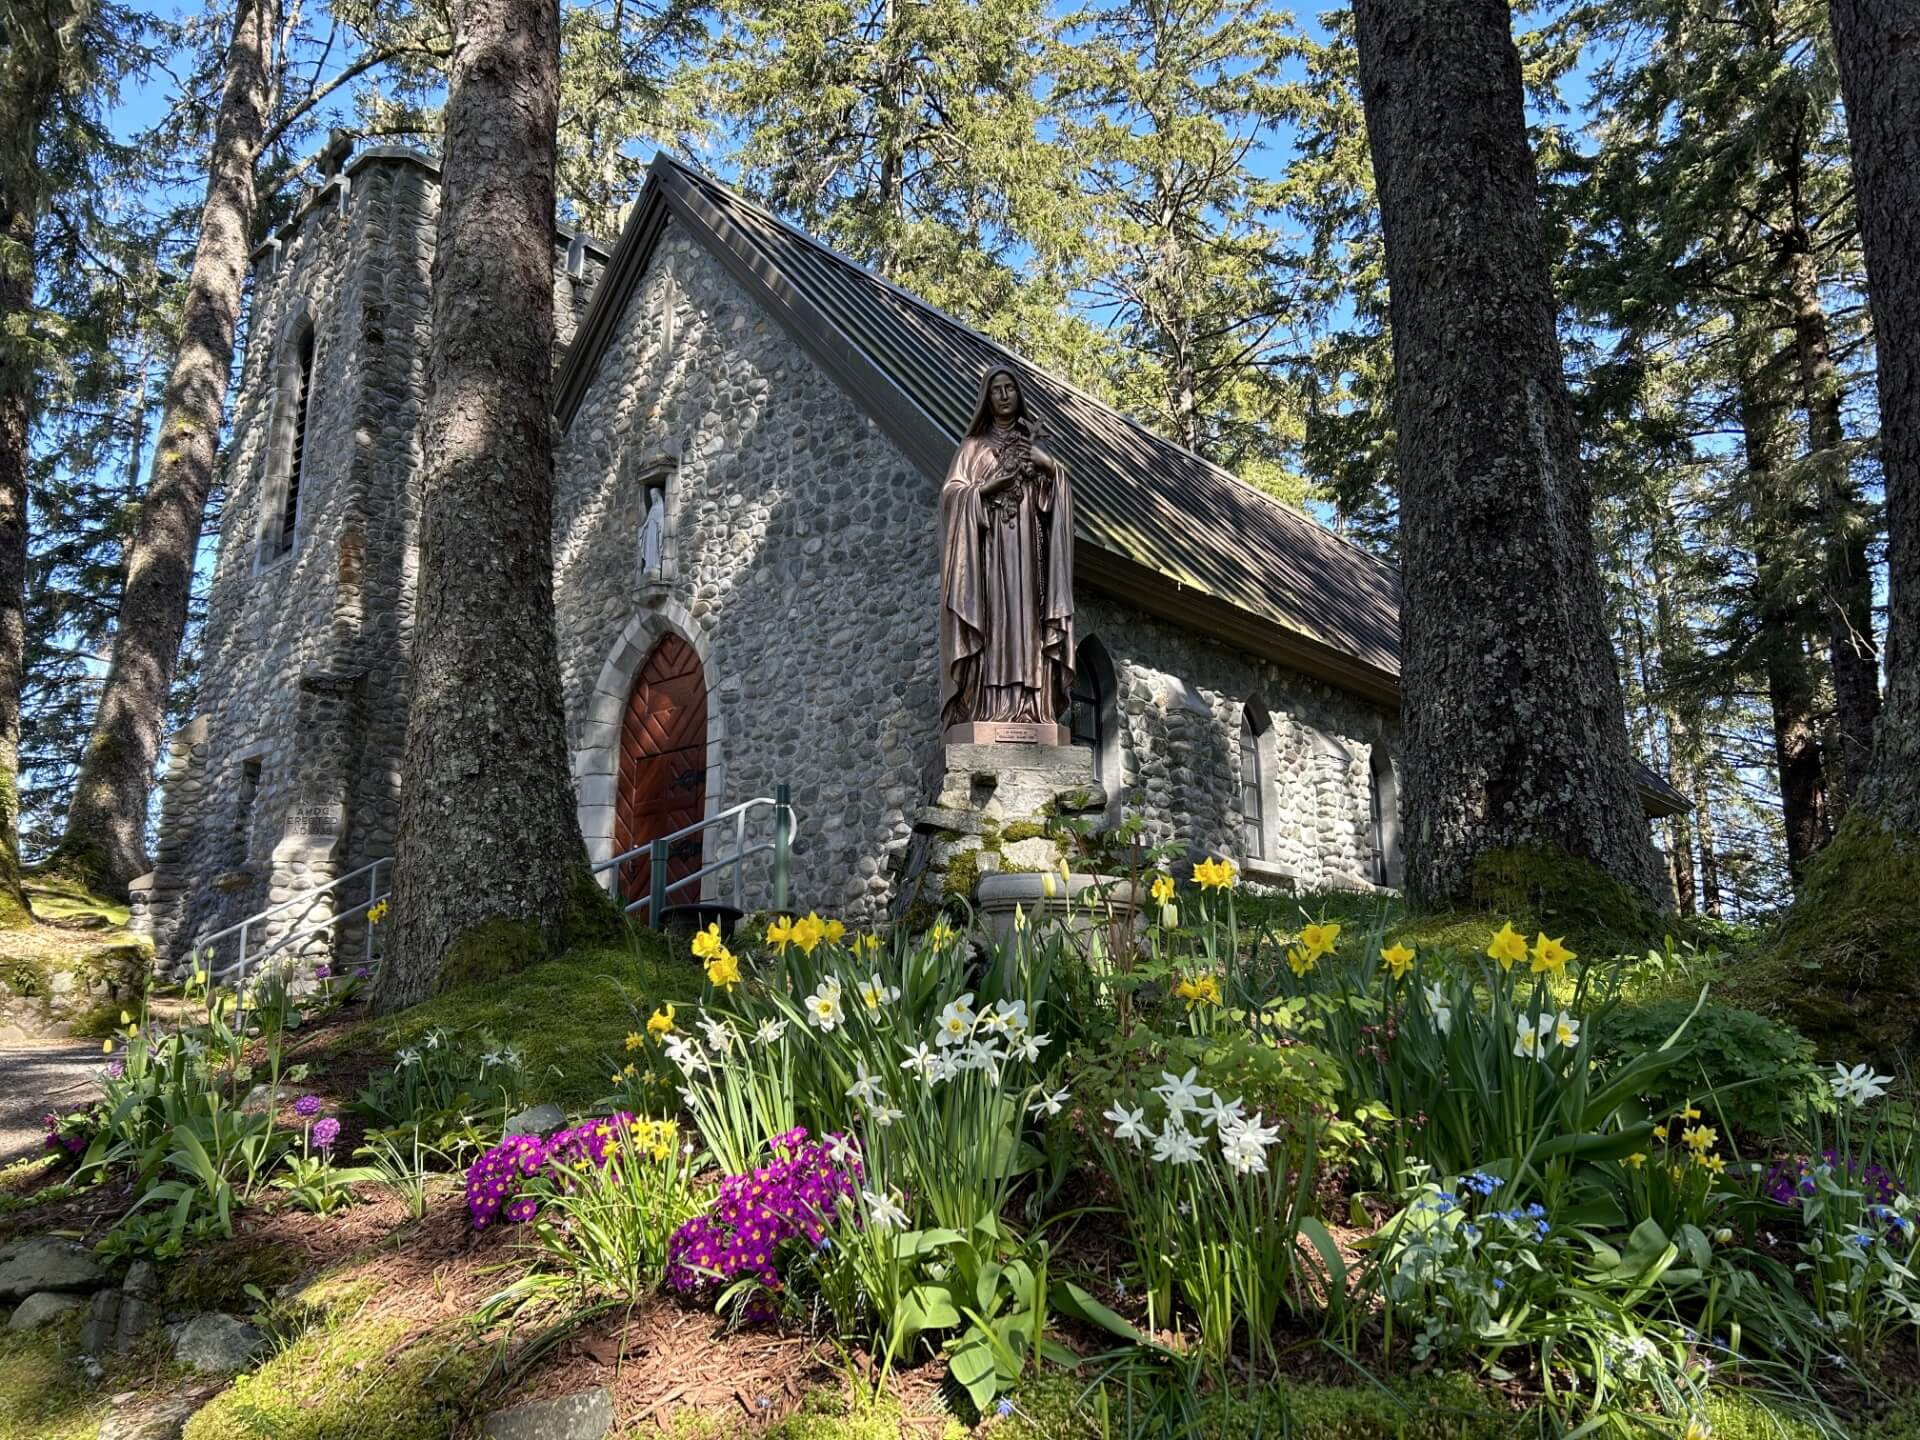 Flowers blooming in front of the Shrine Chapel